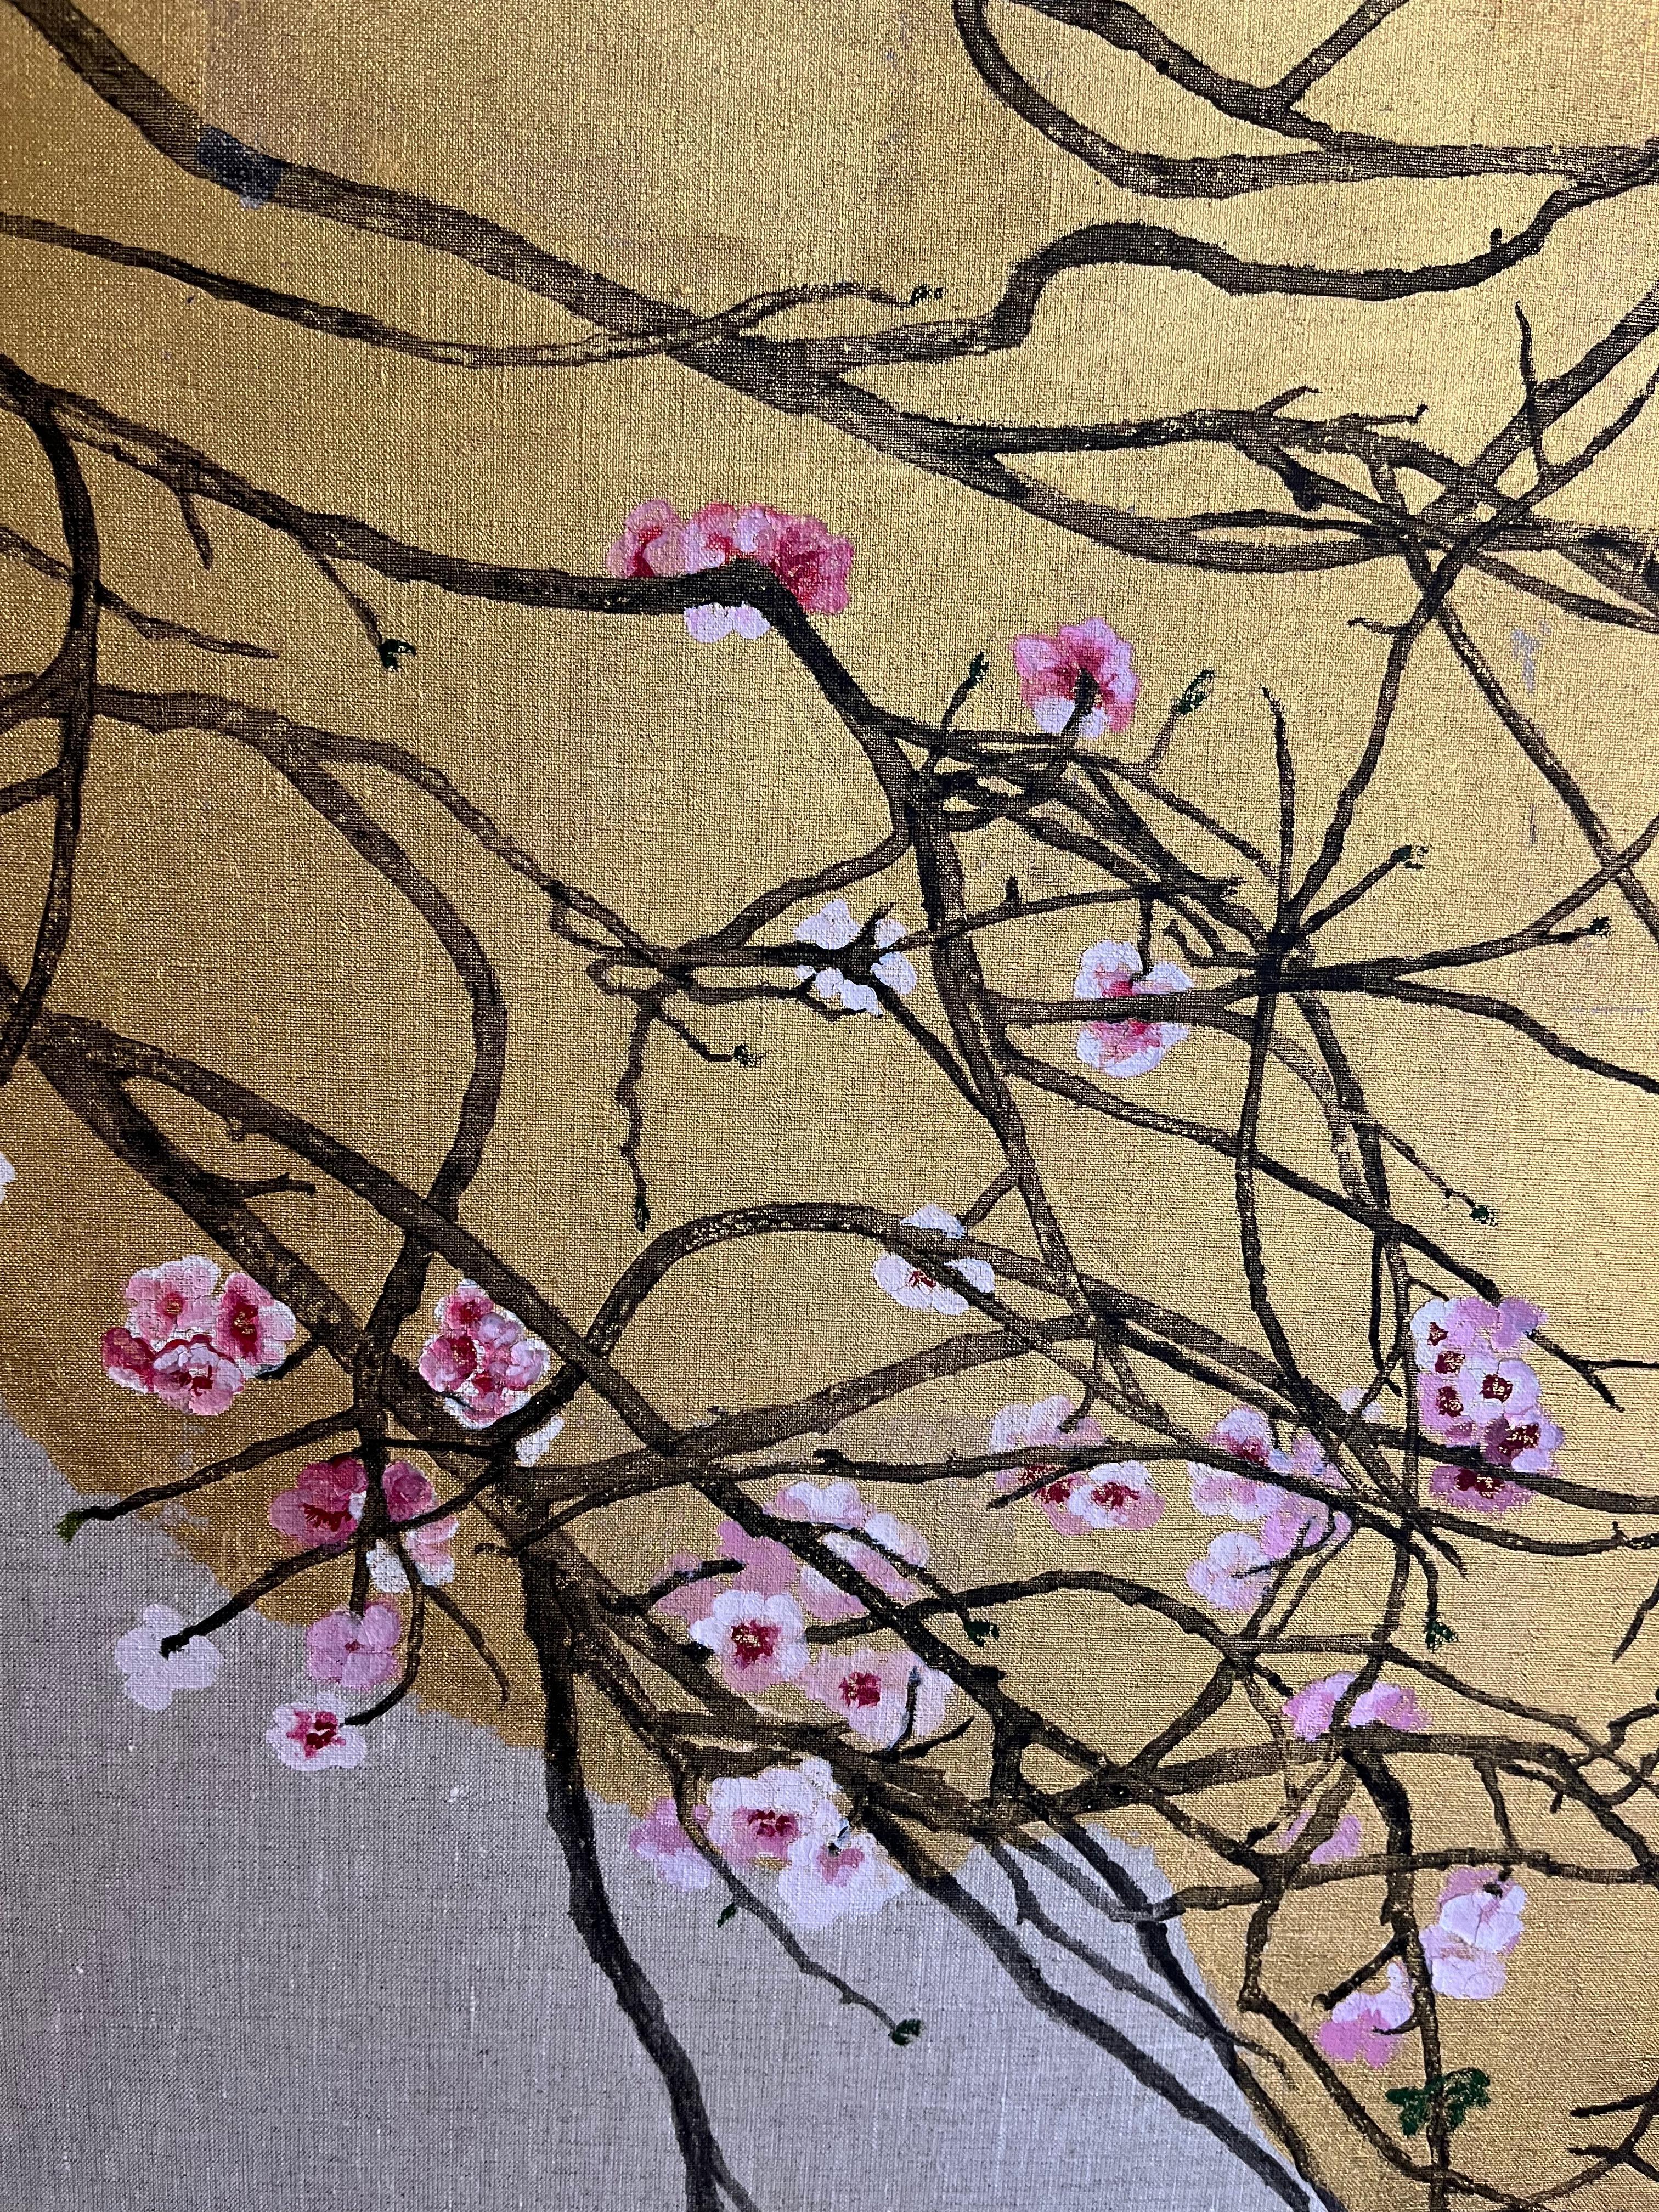 Peach blossom, pink and butterflies, on gold foreground painting. Innovative - Realist Painting by Margherita Leoni